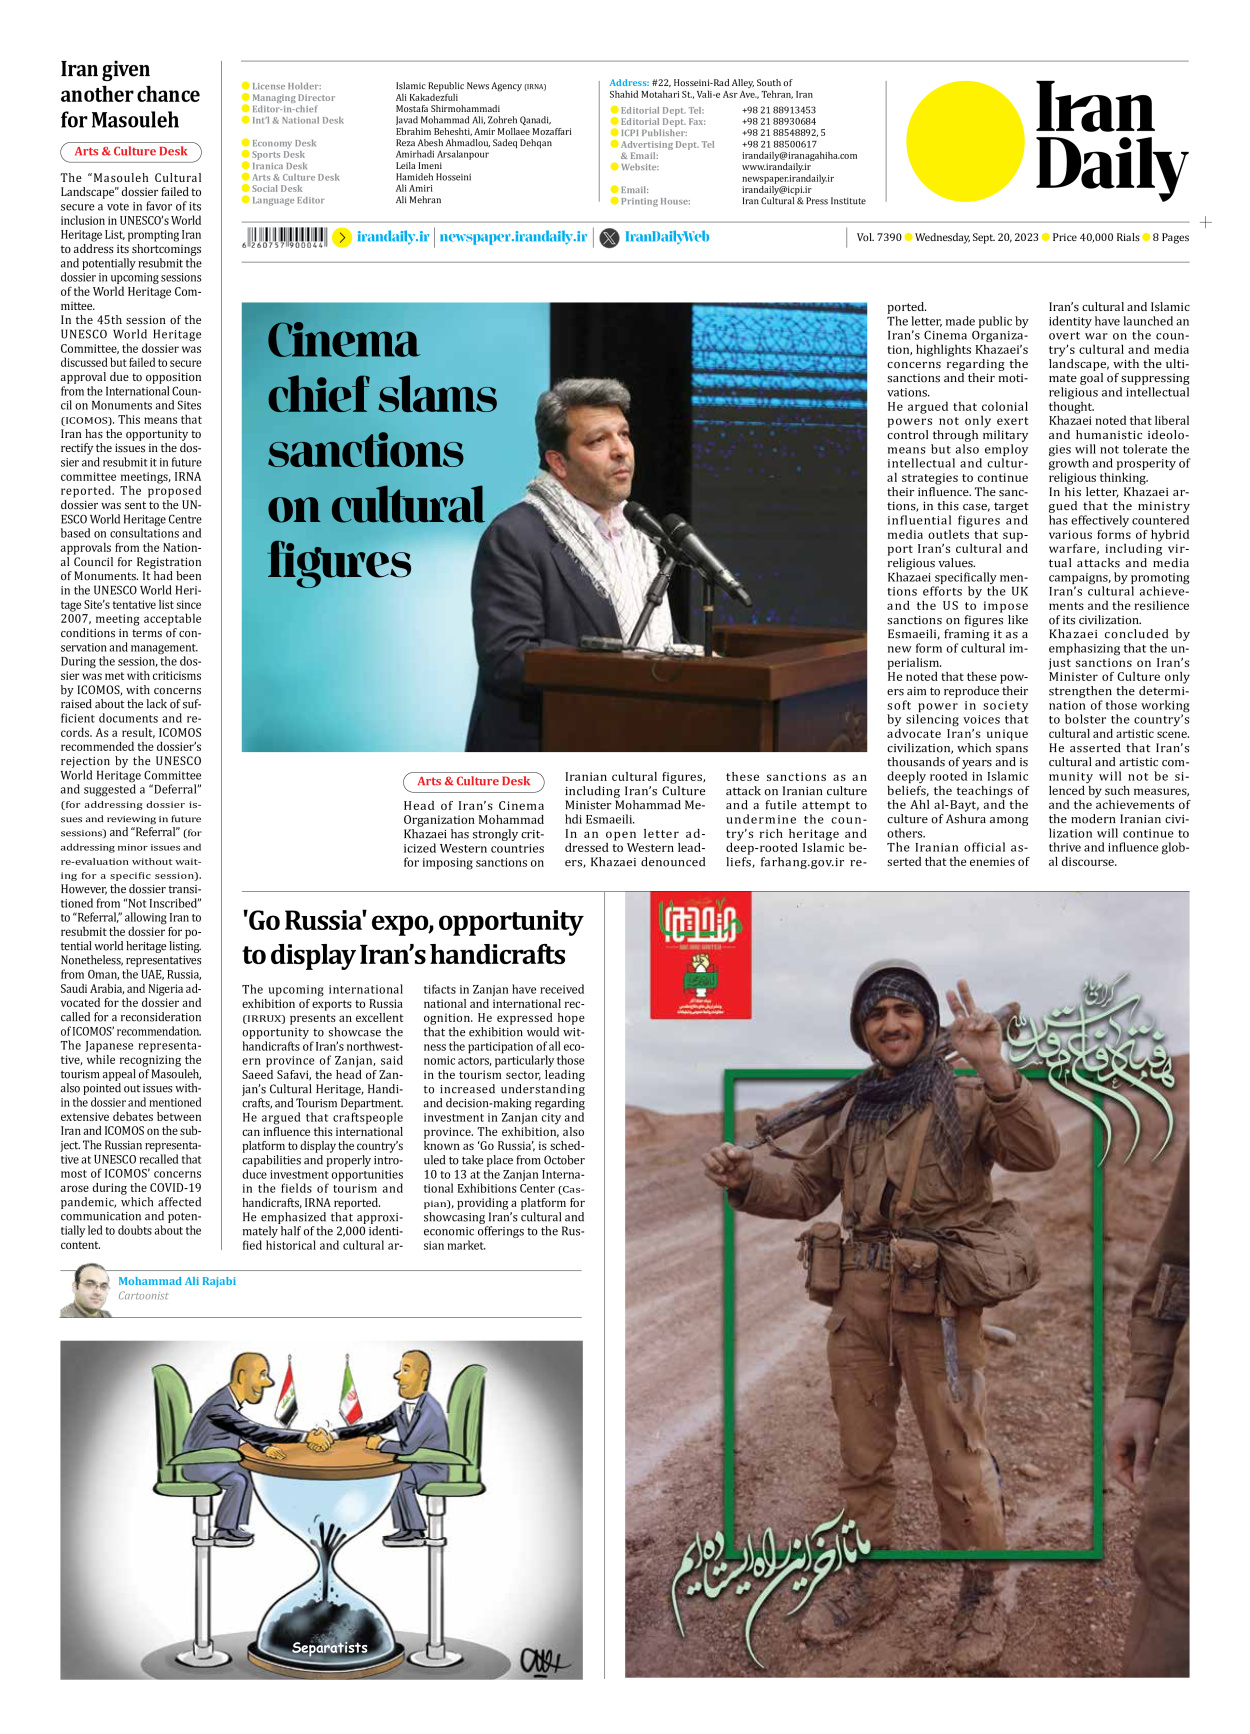 Iran Daily - Number Seven Thousand Three Hundred and Ninety - 20 September 2023 - Page 8